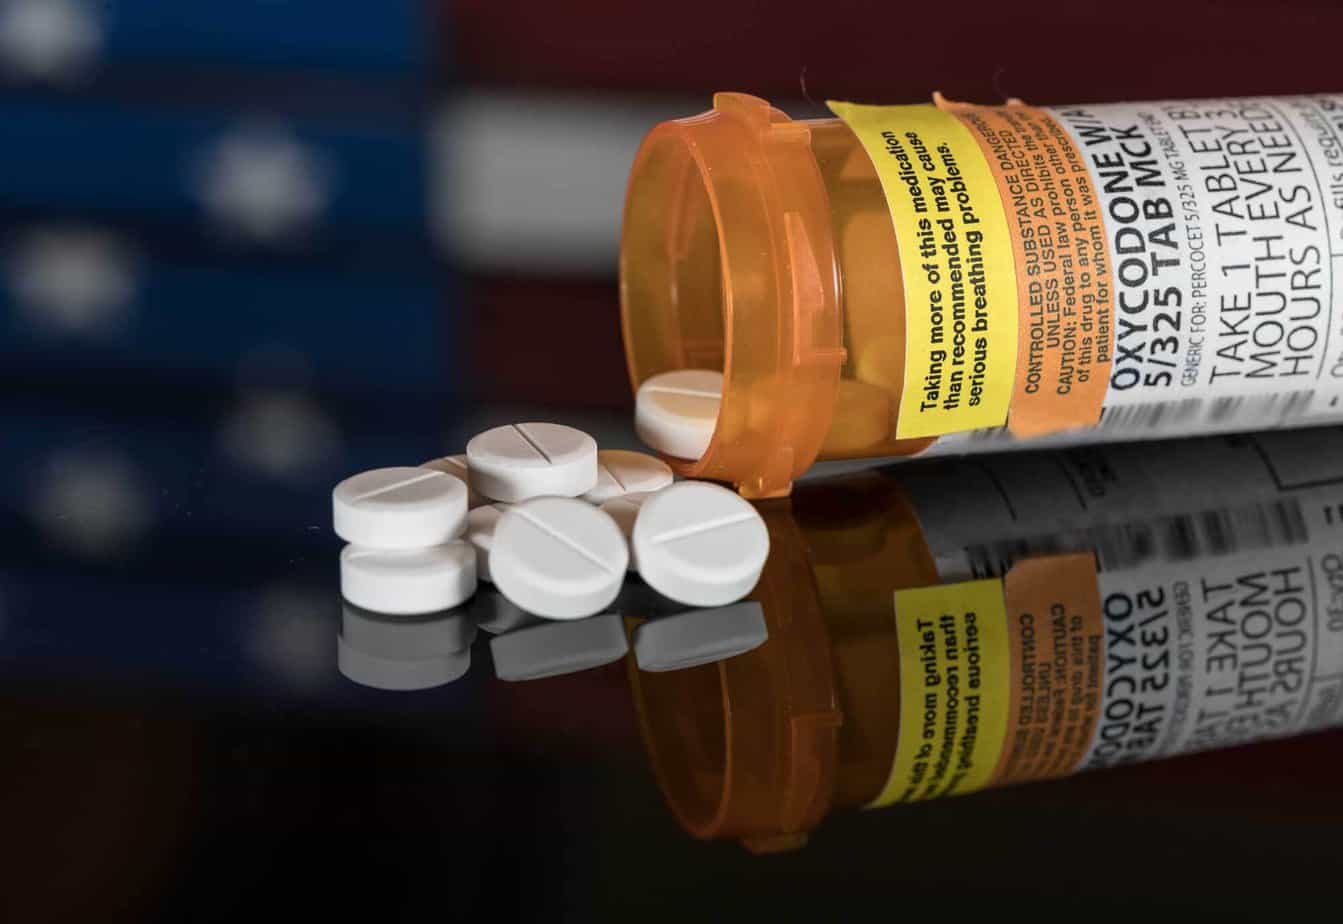 5 Things to Know About the Opioid Bill